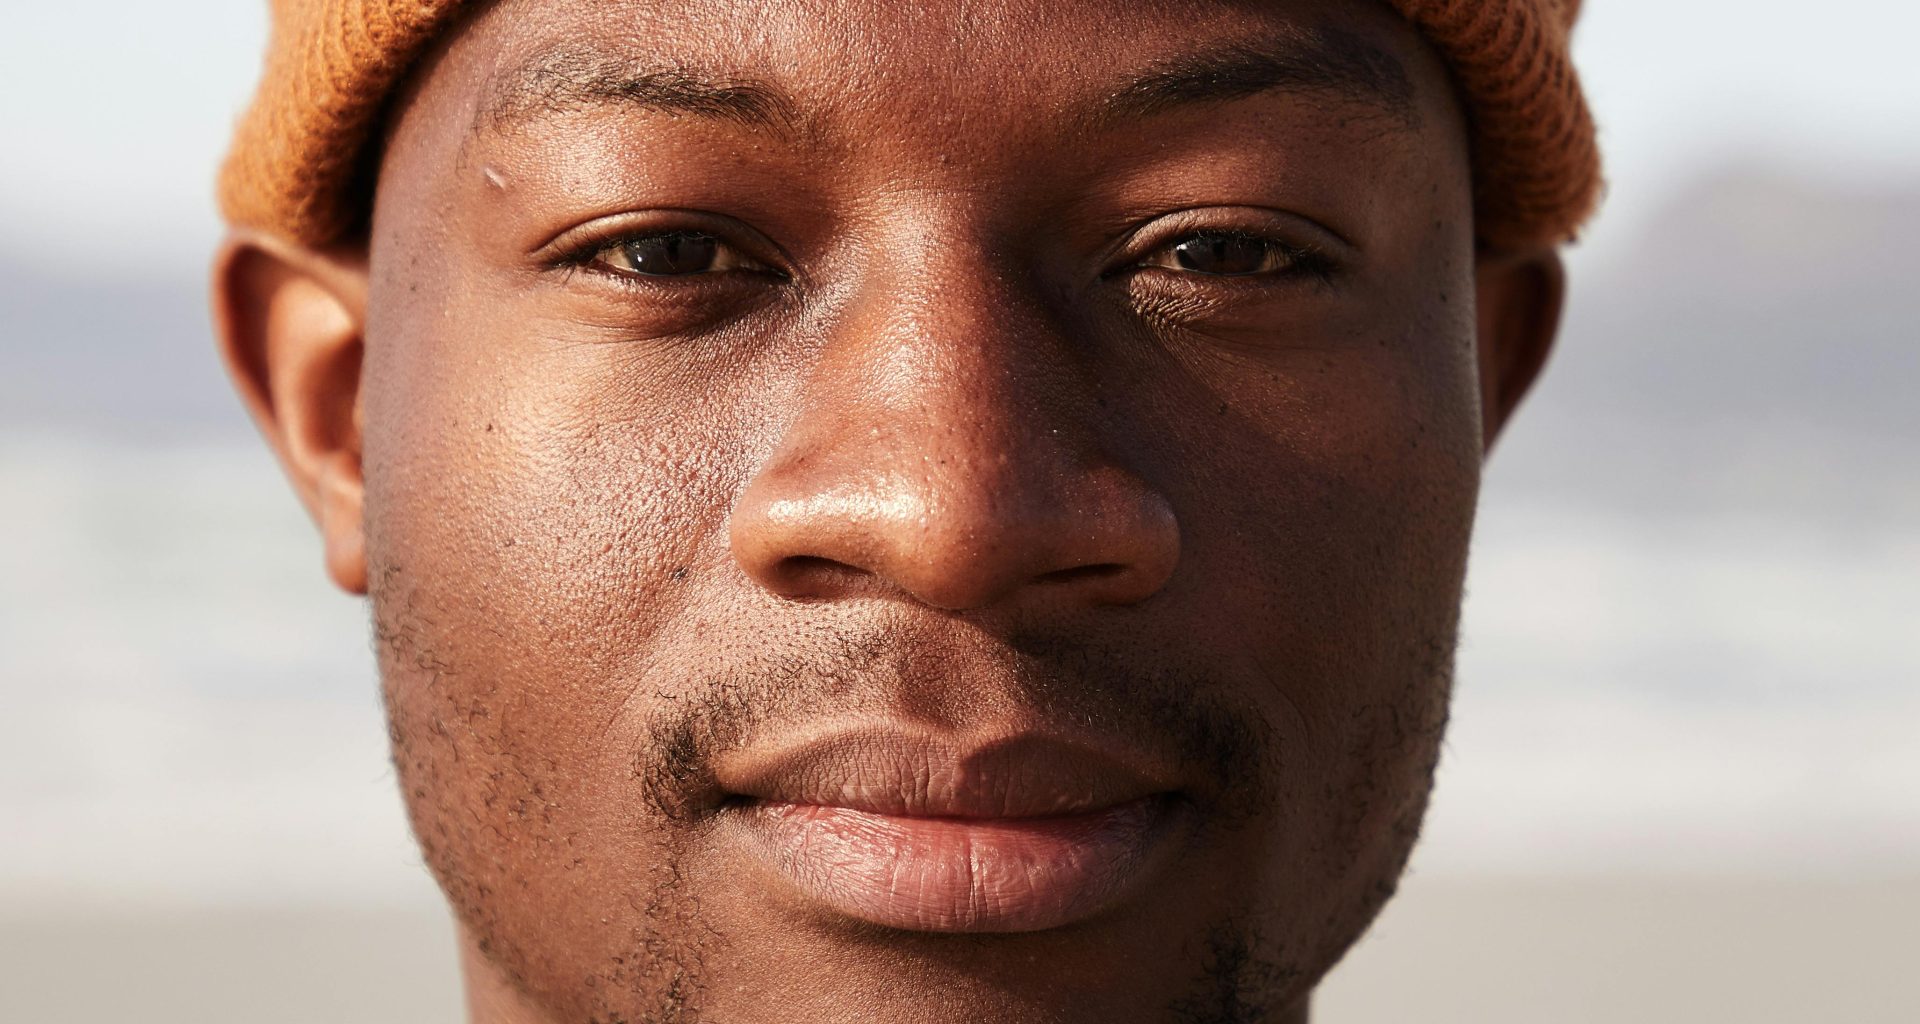 man with beanie staring into camera